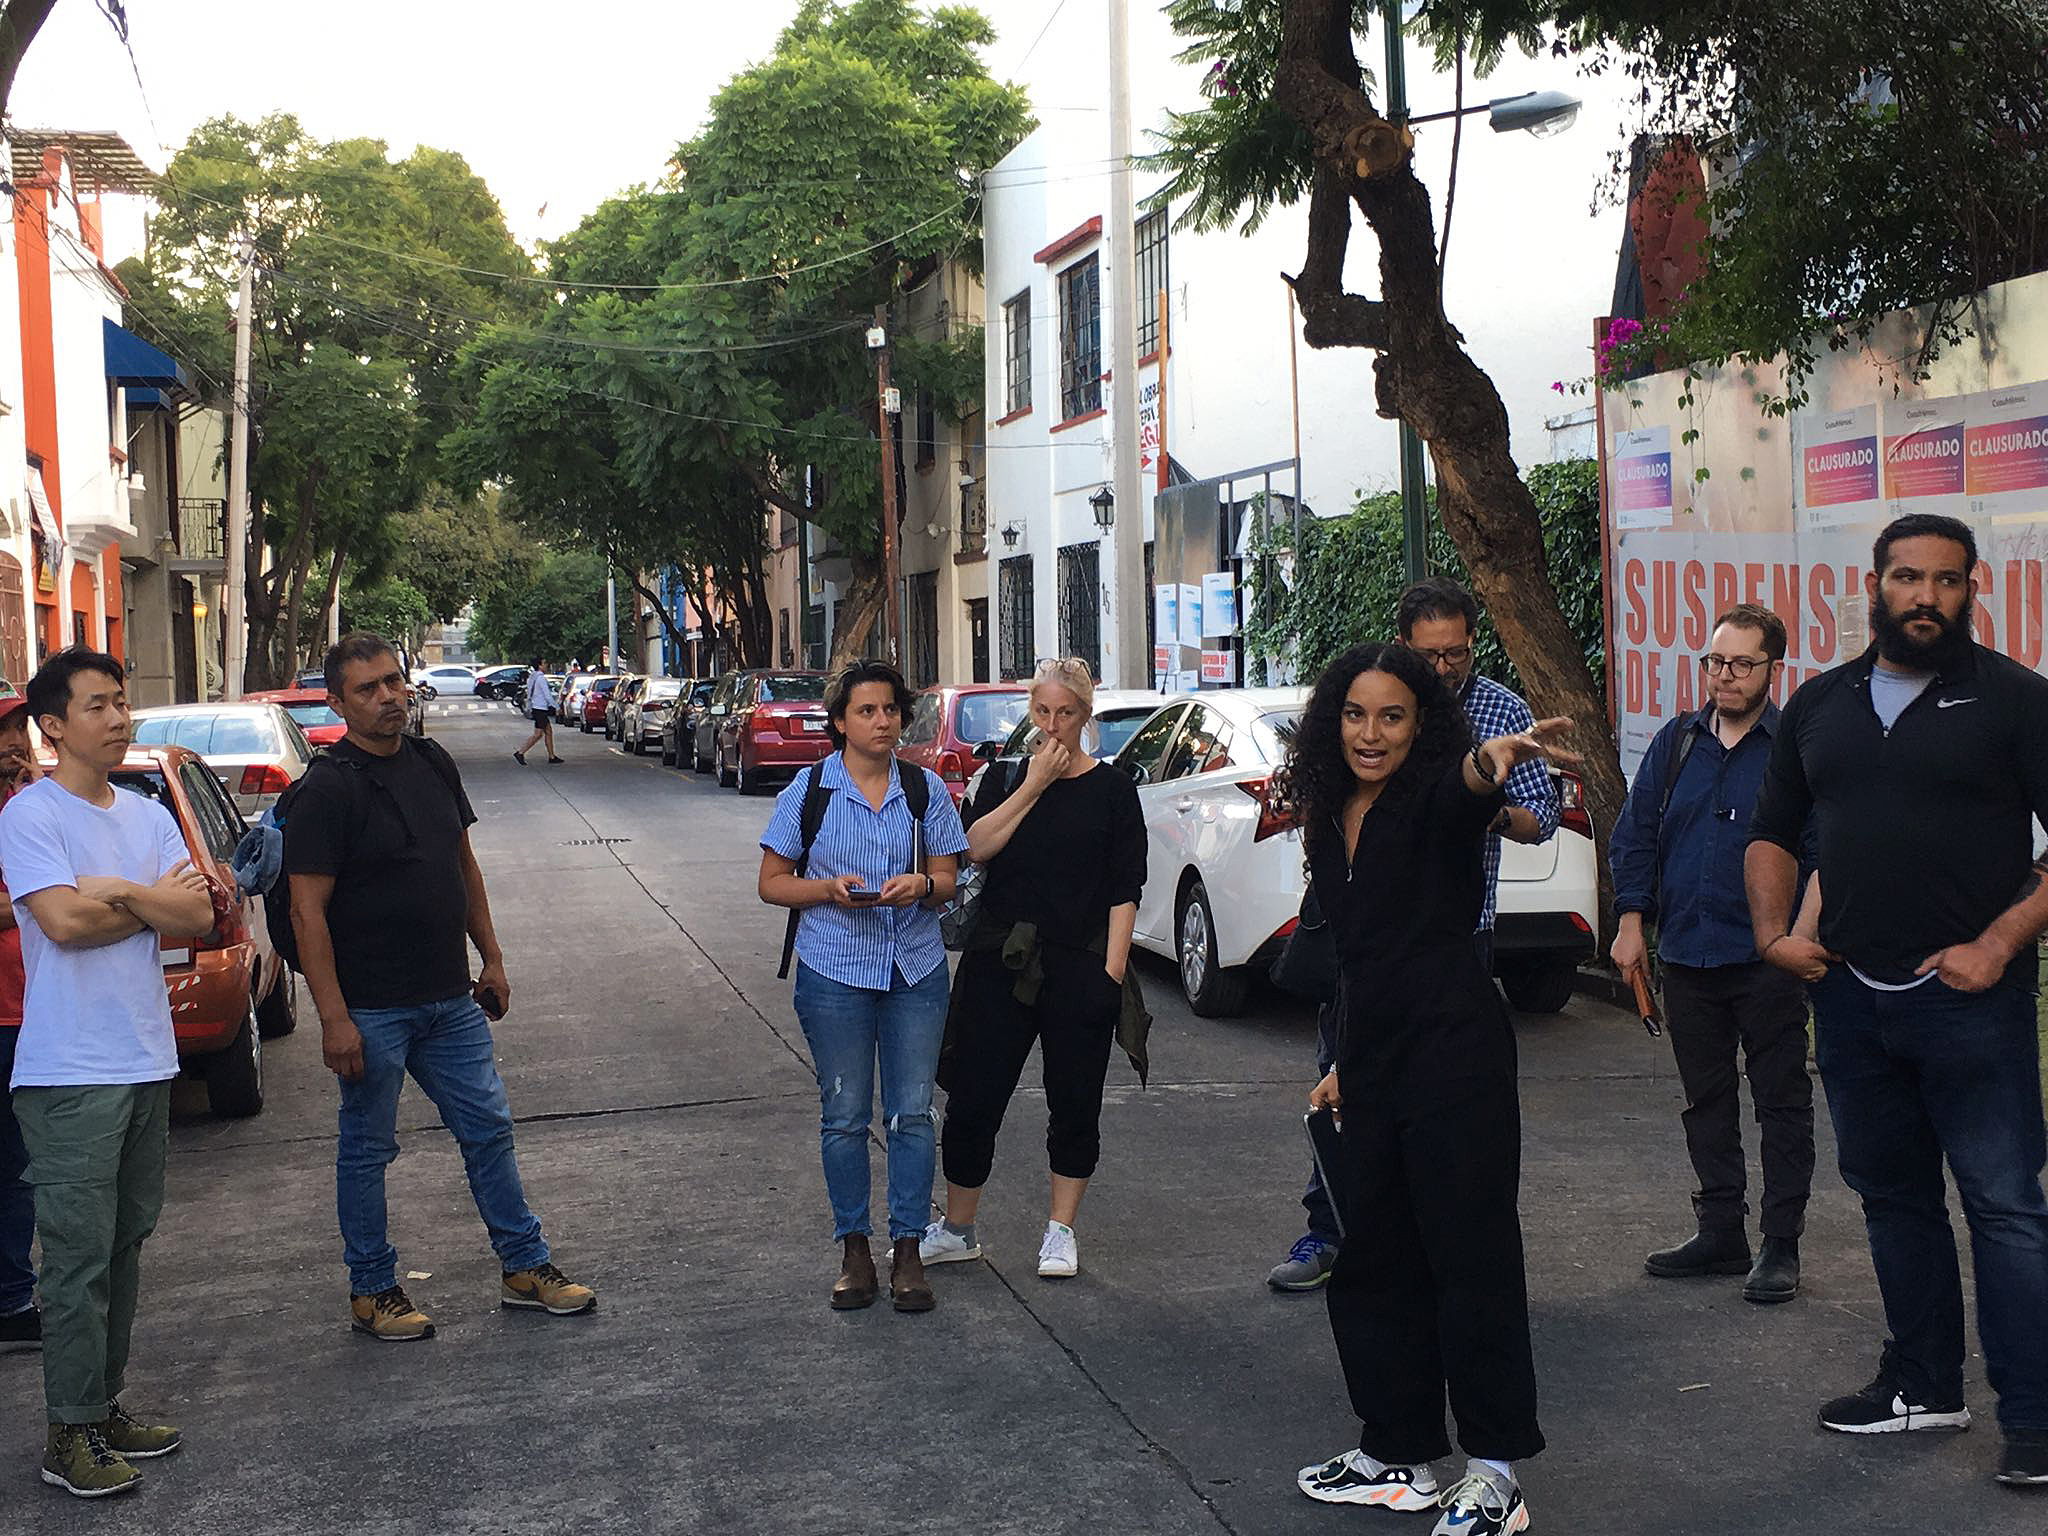 Marcus (first from left) and the rest of the creative team on-site in Mexico City.